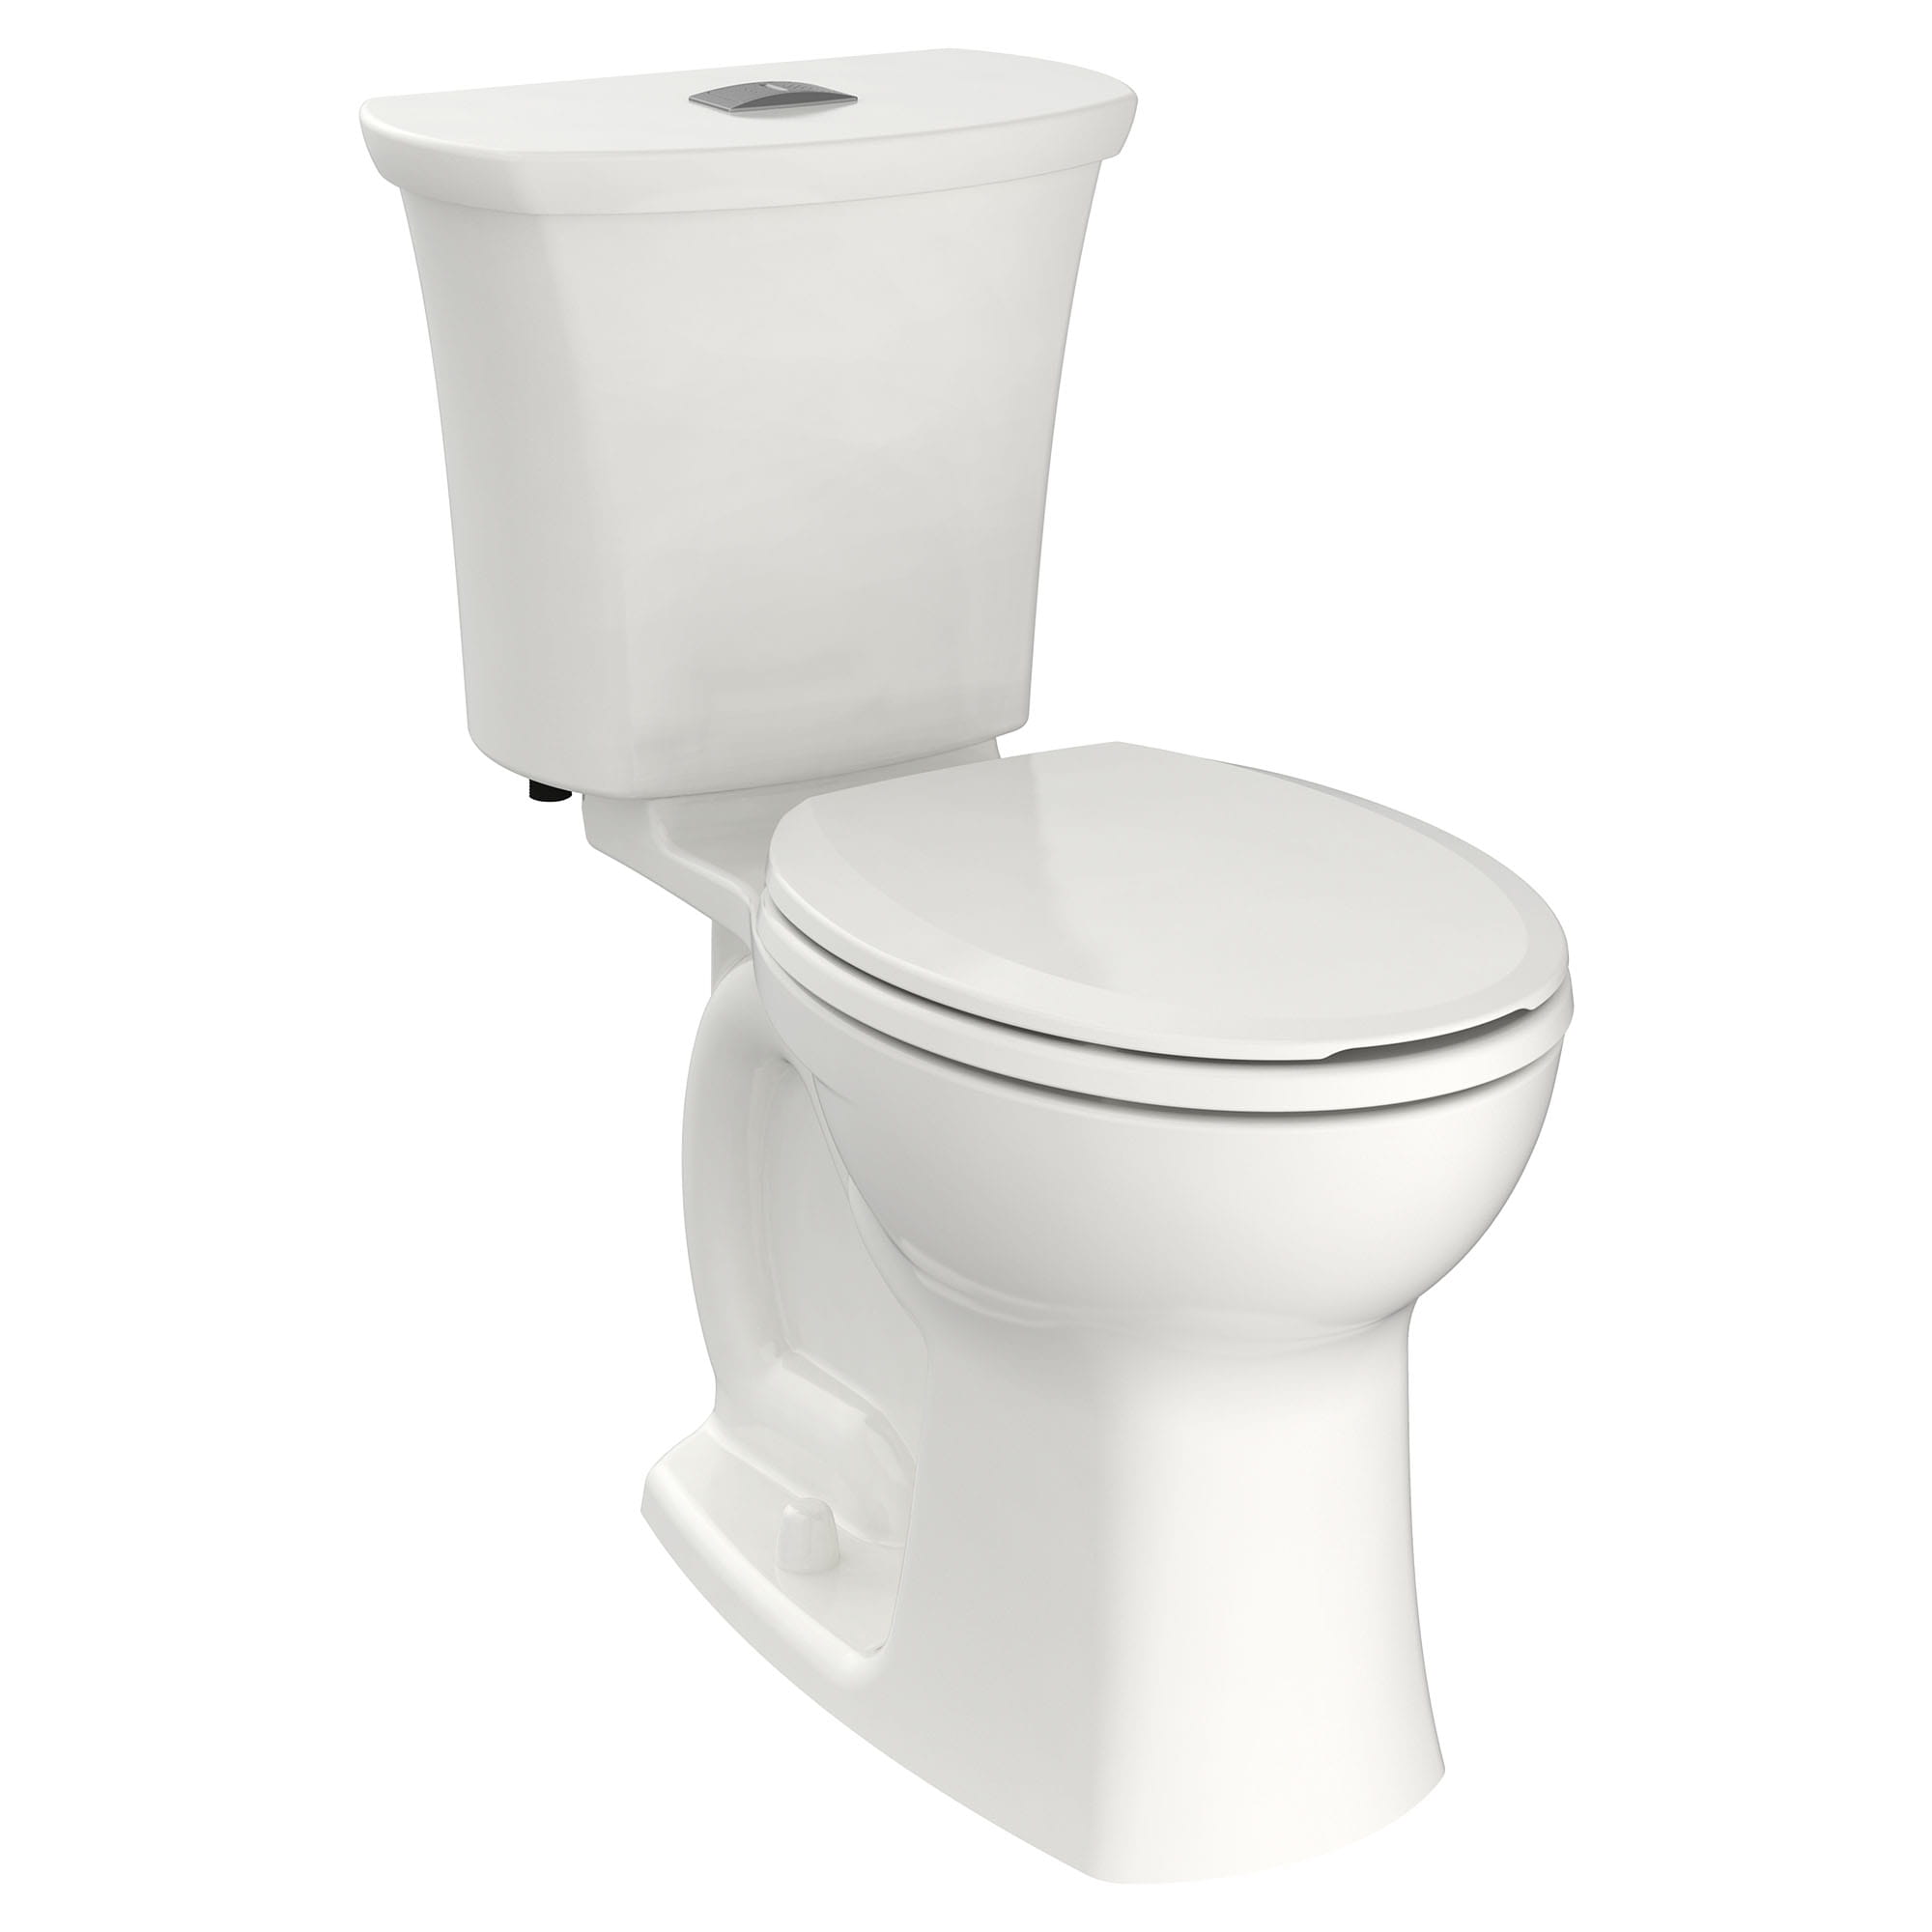 Edgemere® Two-Piece Dual Flush 1.6 gpf/6.0 Lpf and 1.1 gpf/4.2 Lpf Chair Height Round Front Toilet Less Seat